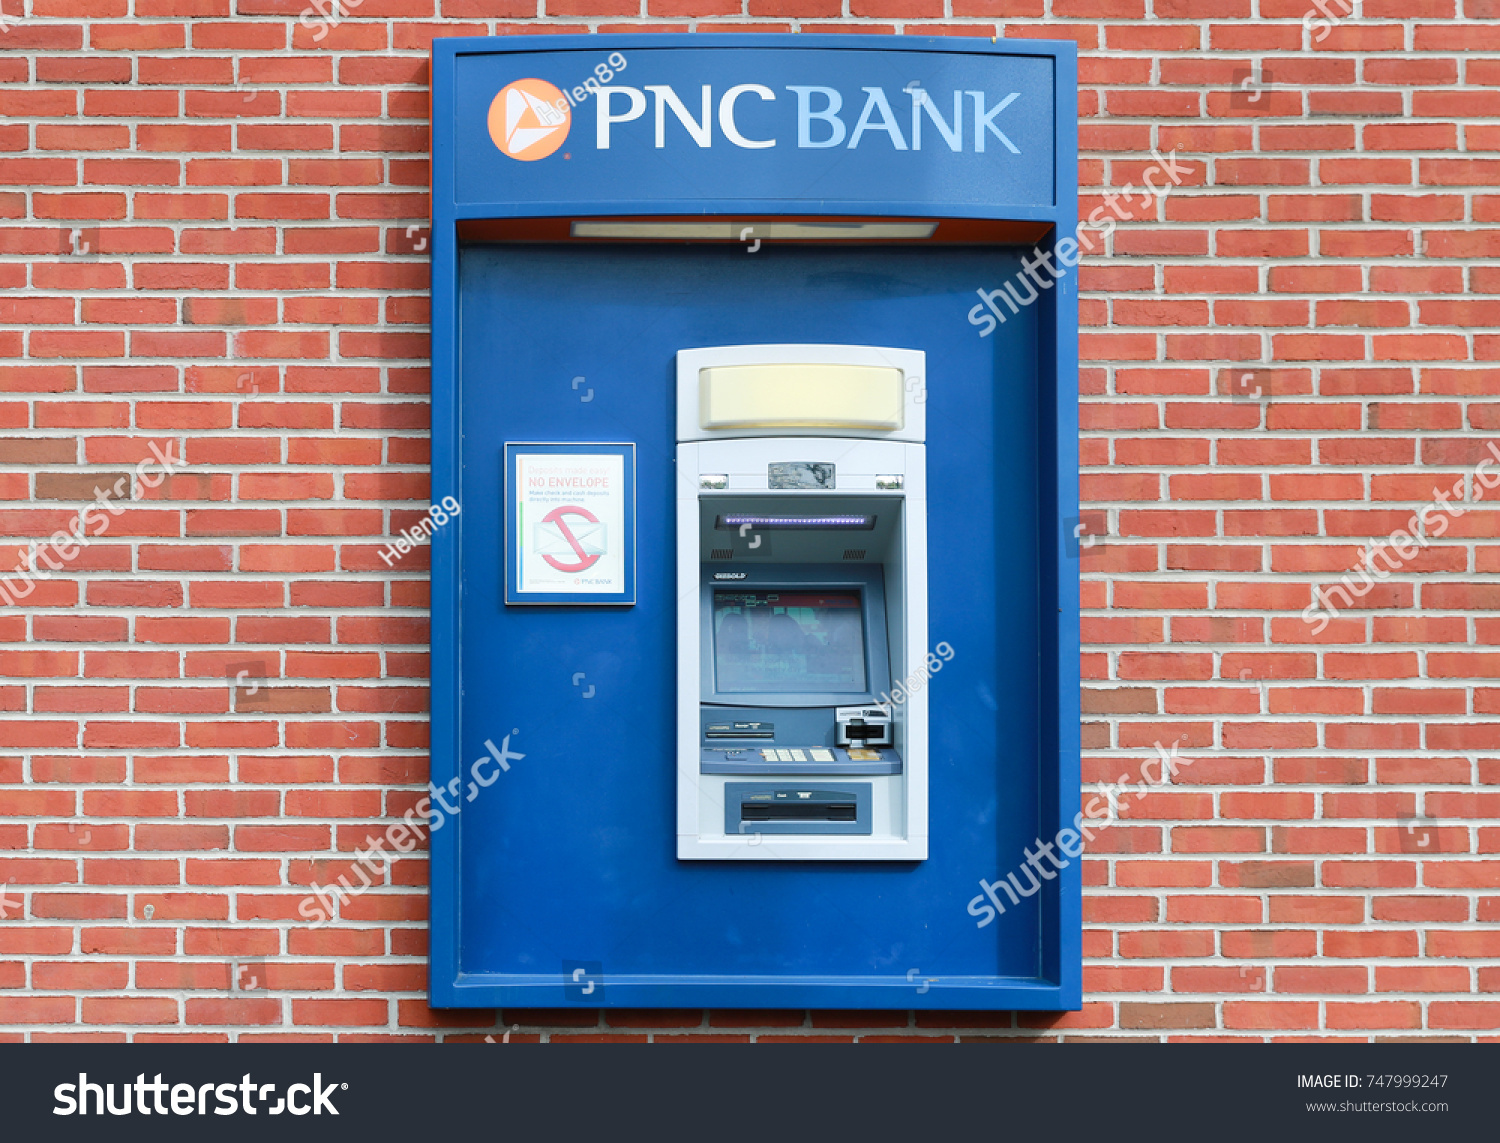 Pnc Bank And Atm Near Me - Wasfa Blog